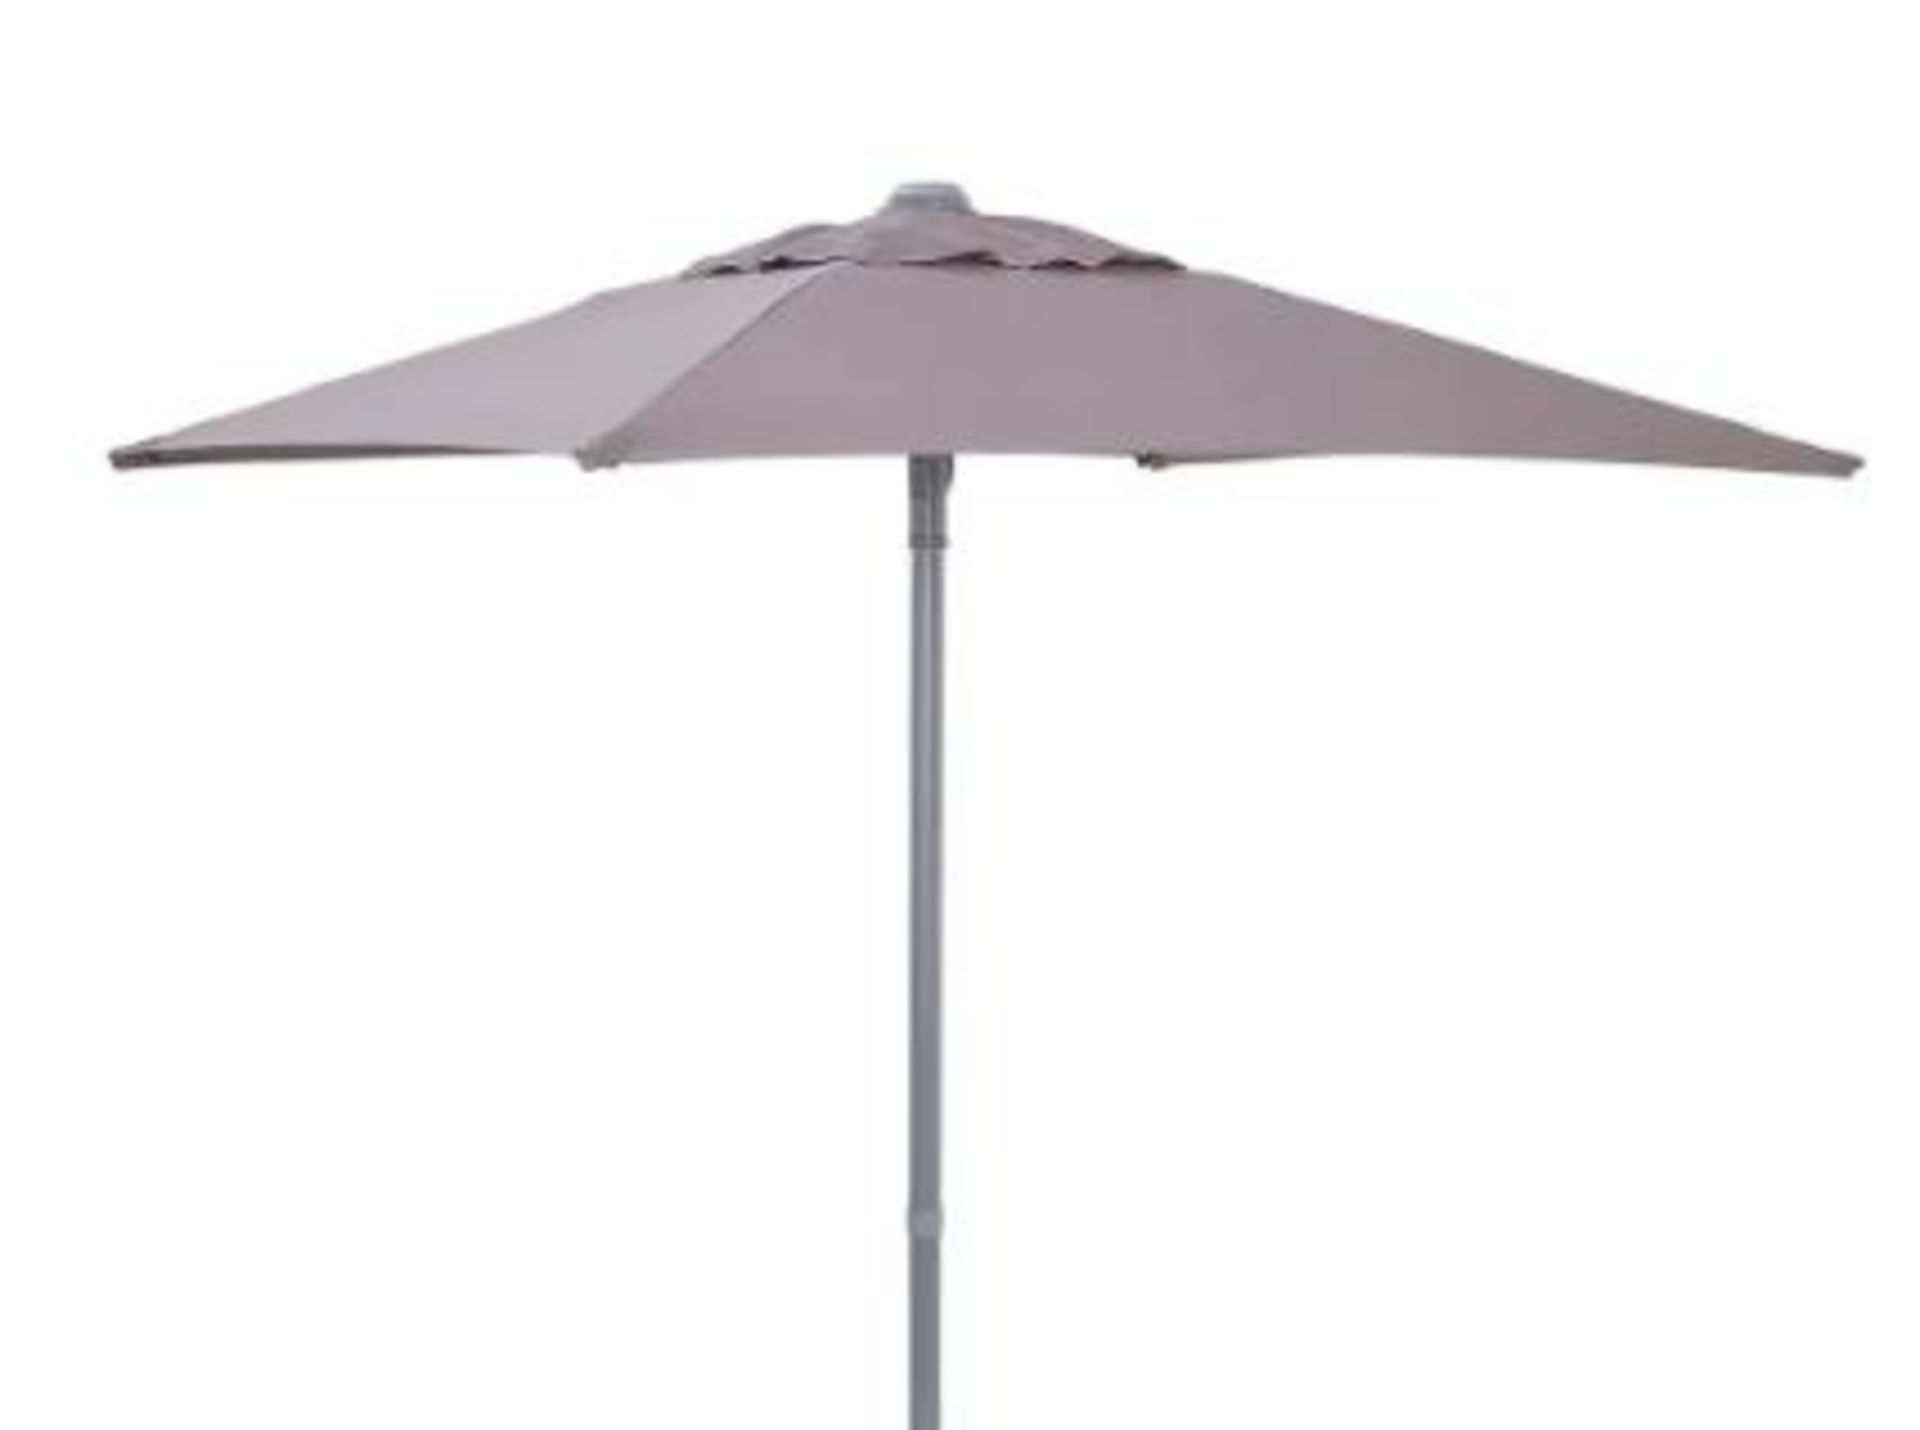 (R7G) 1x Andorra Dark Grey Square Parasol. Packaged Dimensions (110x 20x 10cm). Extended Dimensions - Image 2 of 7